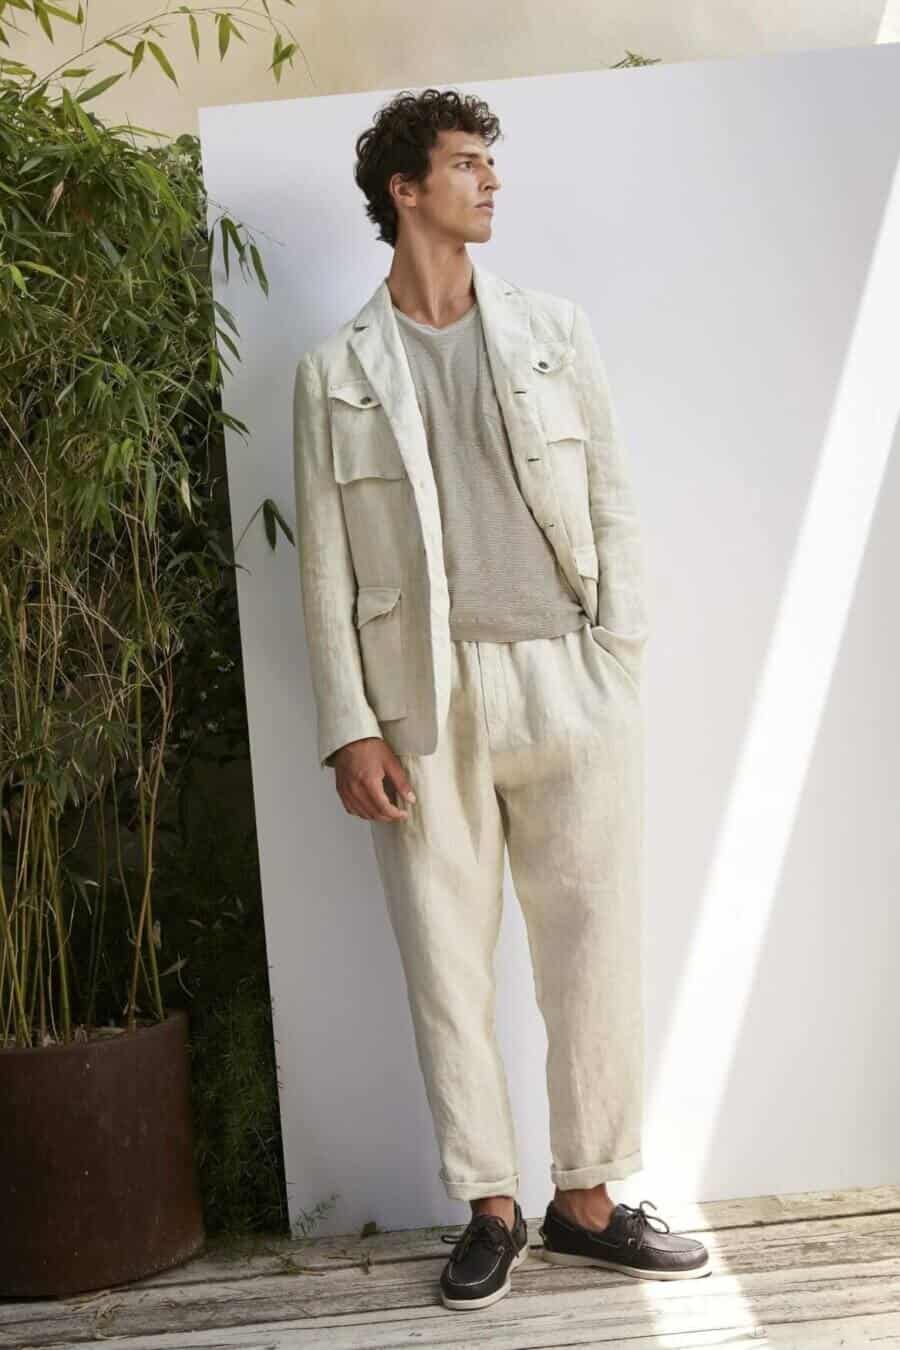 Men's all white outfit - linen blazer and trousers with grey t-shirt